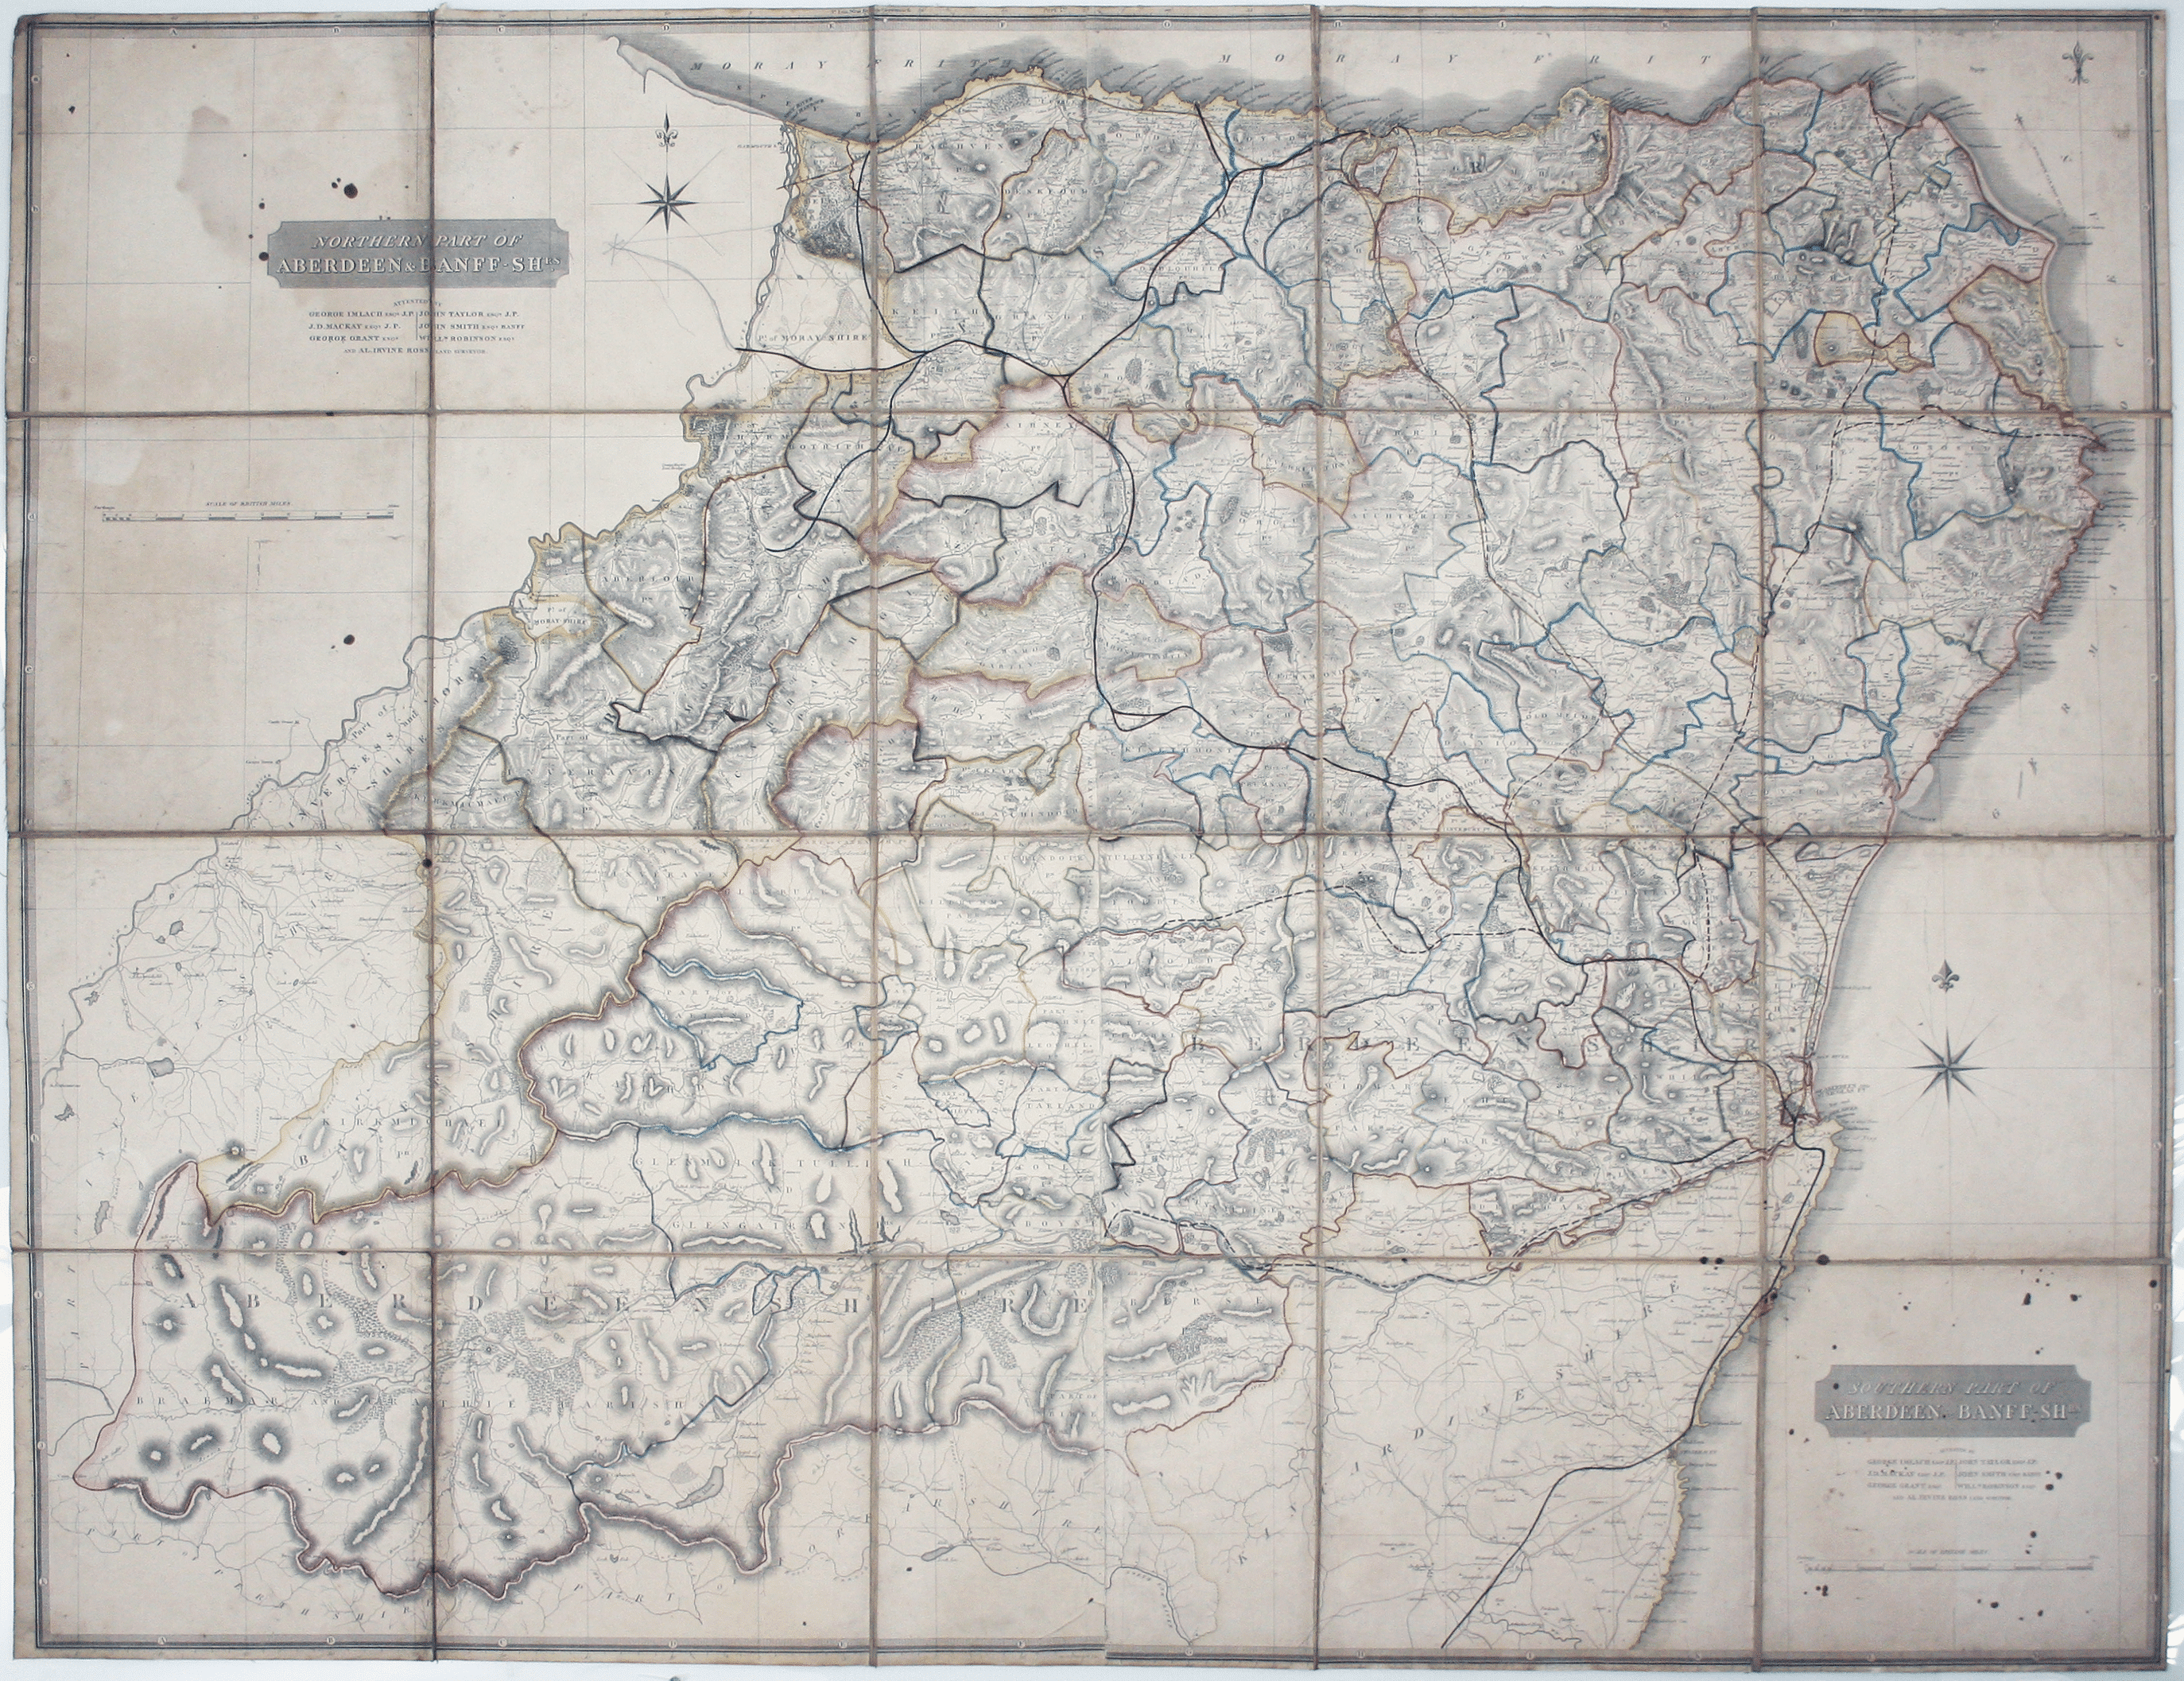 Thomson’s Large-scale Map of Aberdeenshire